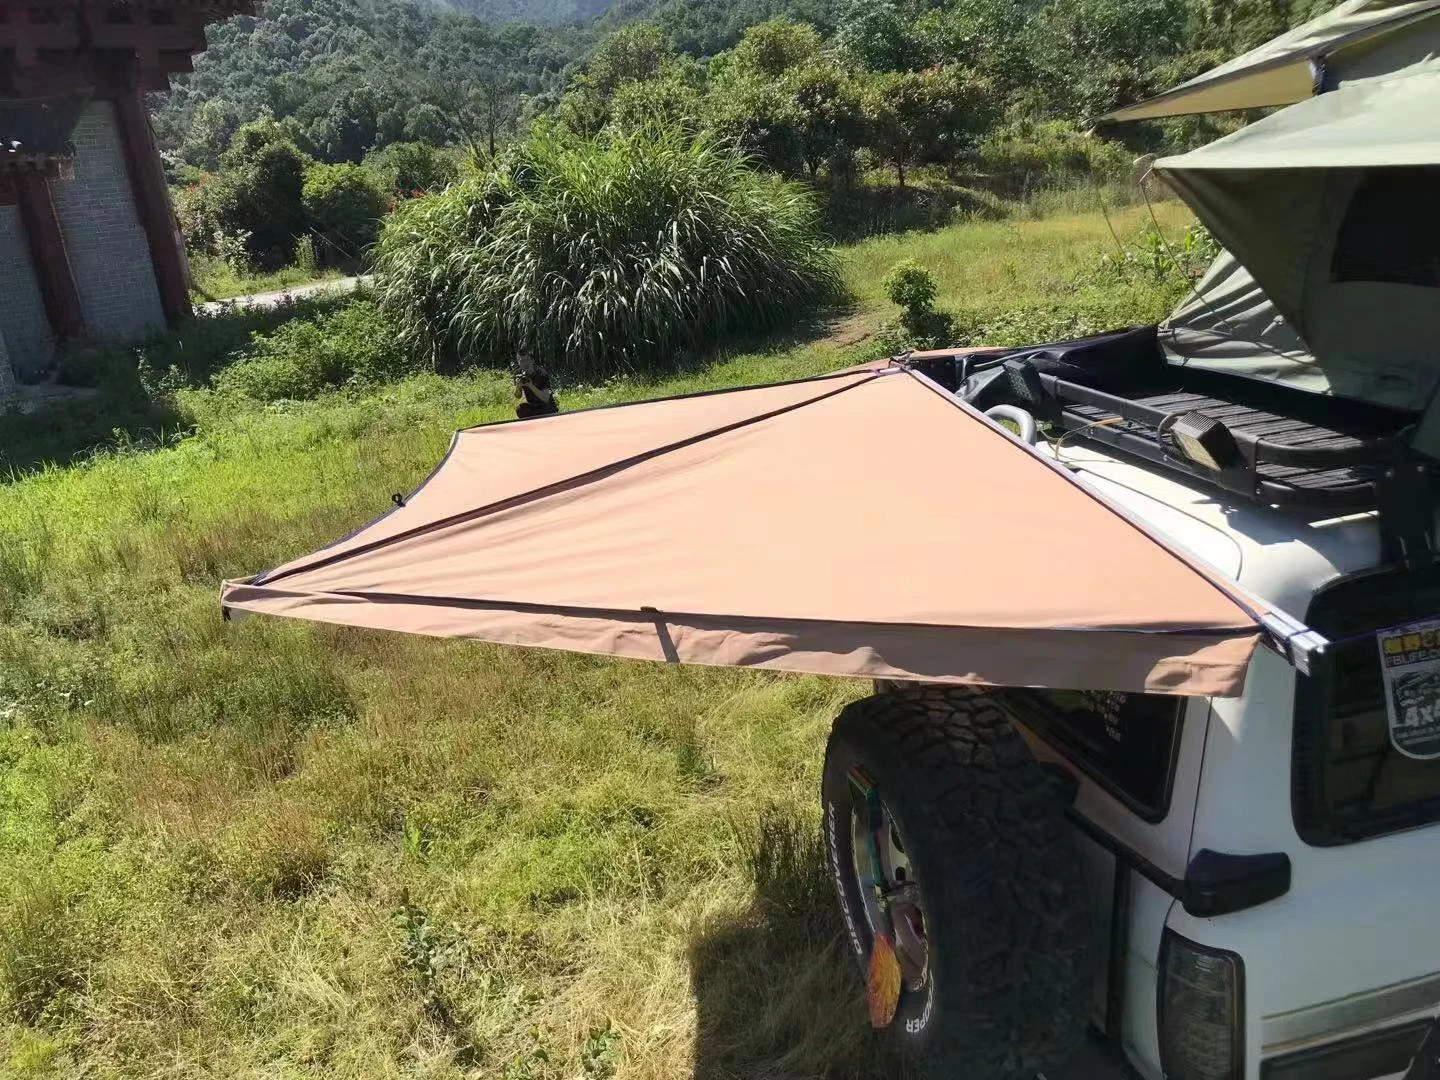 Car side foxwing 270 degree coverage swing out awning